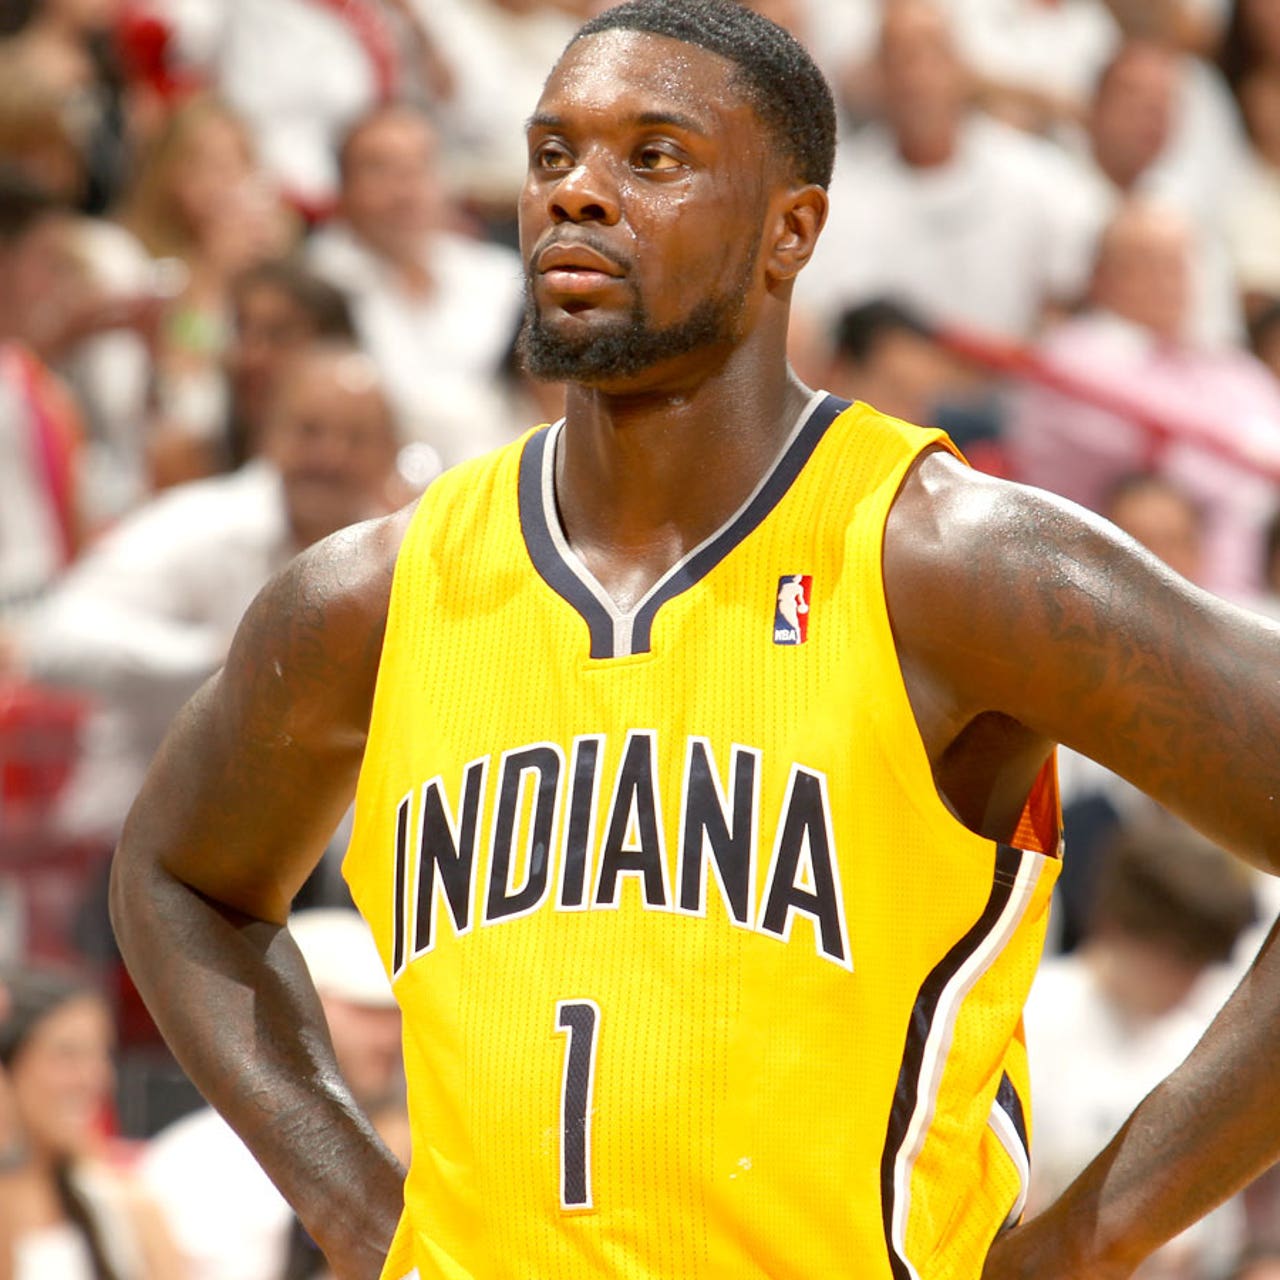 Lance Stephenson gets a 30 piece, where was that for the Atlanta Hawks?